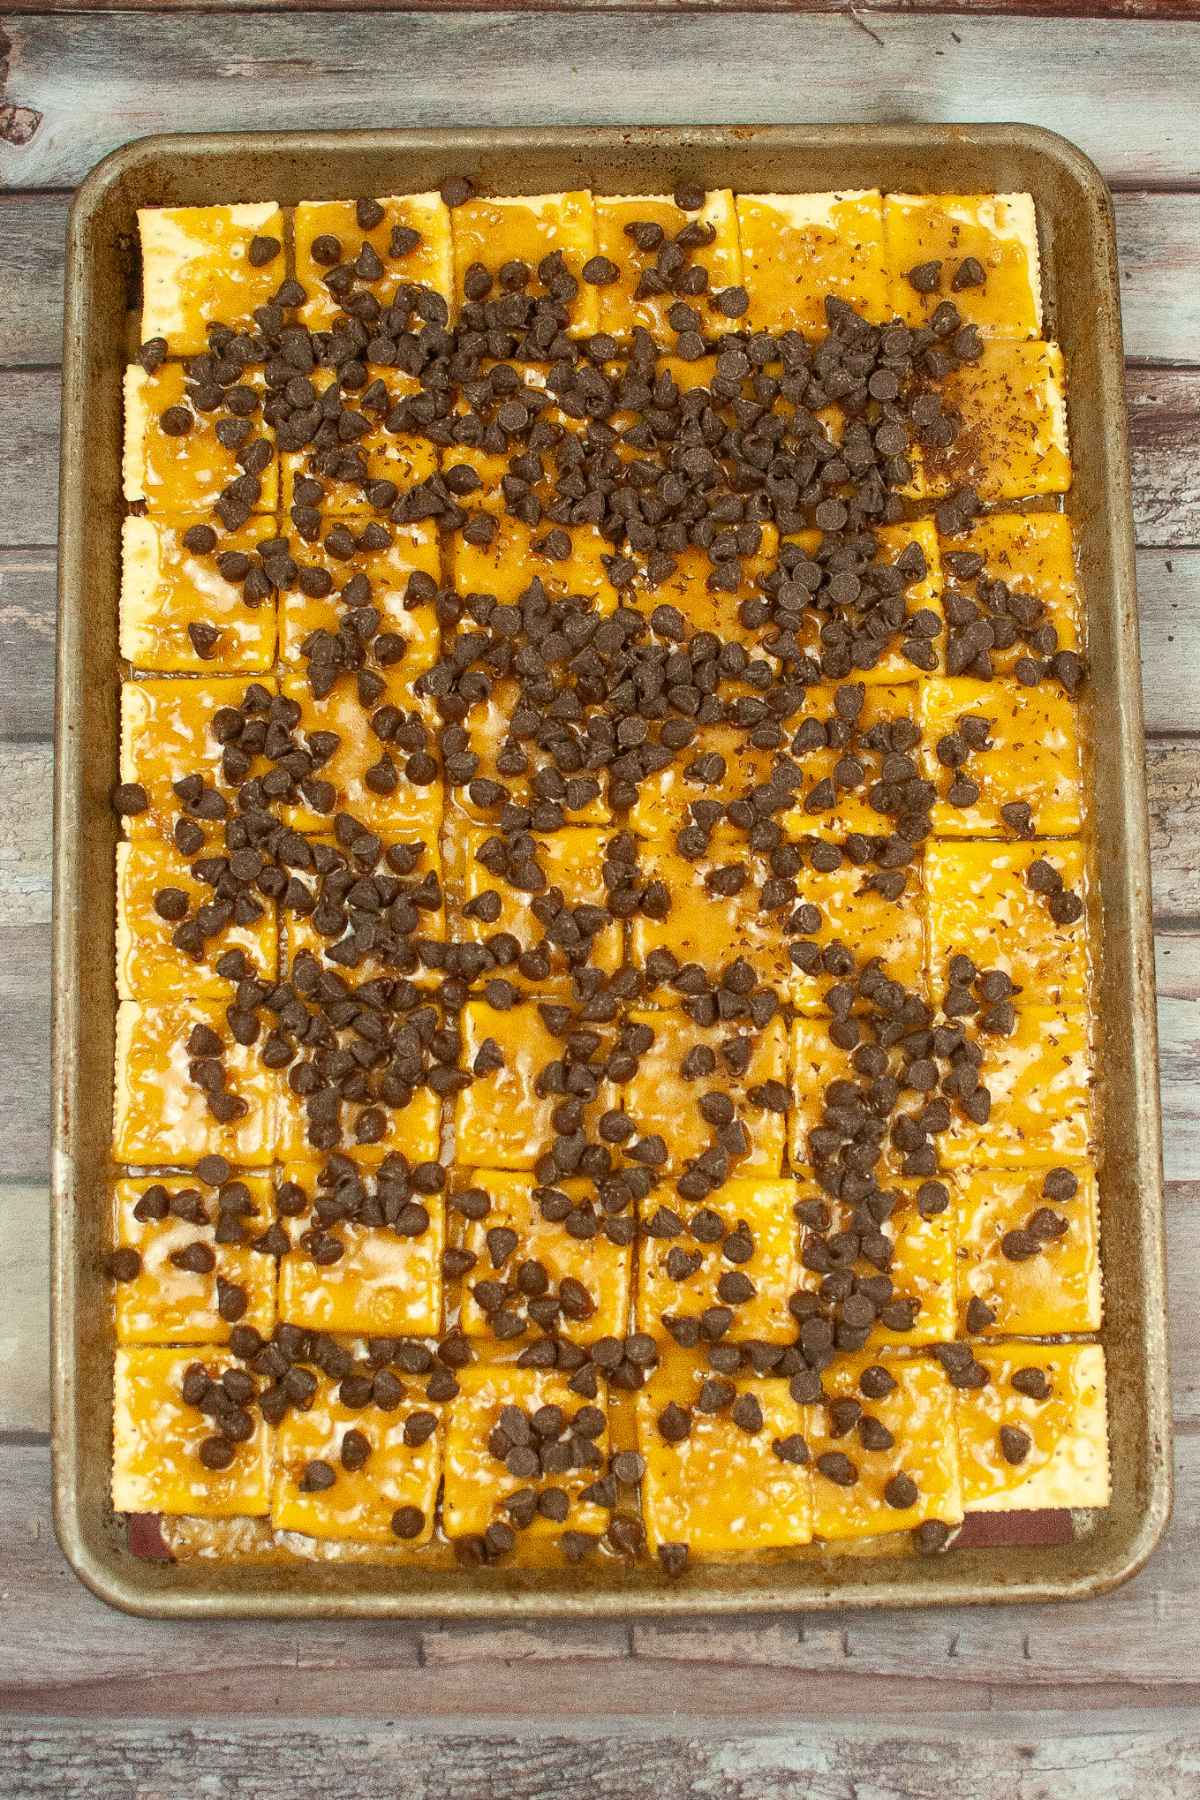 Saltines on jelly roll pan with toffee and chocolate chips on top of toffee.